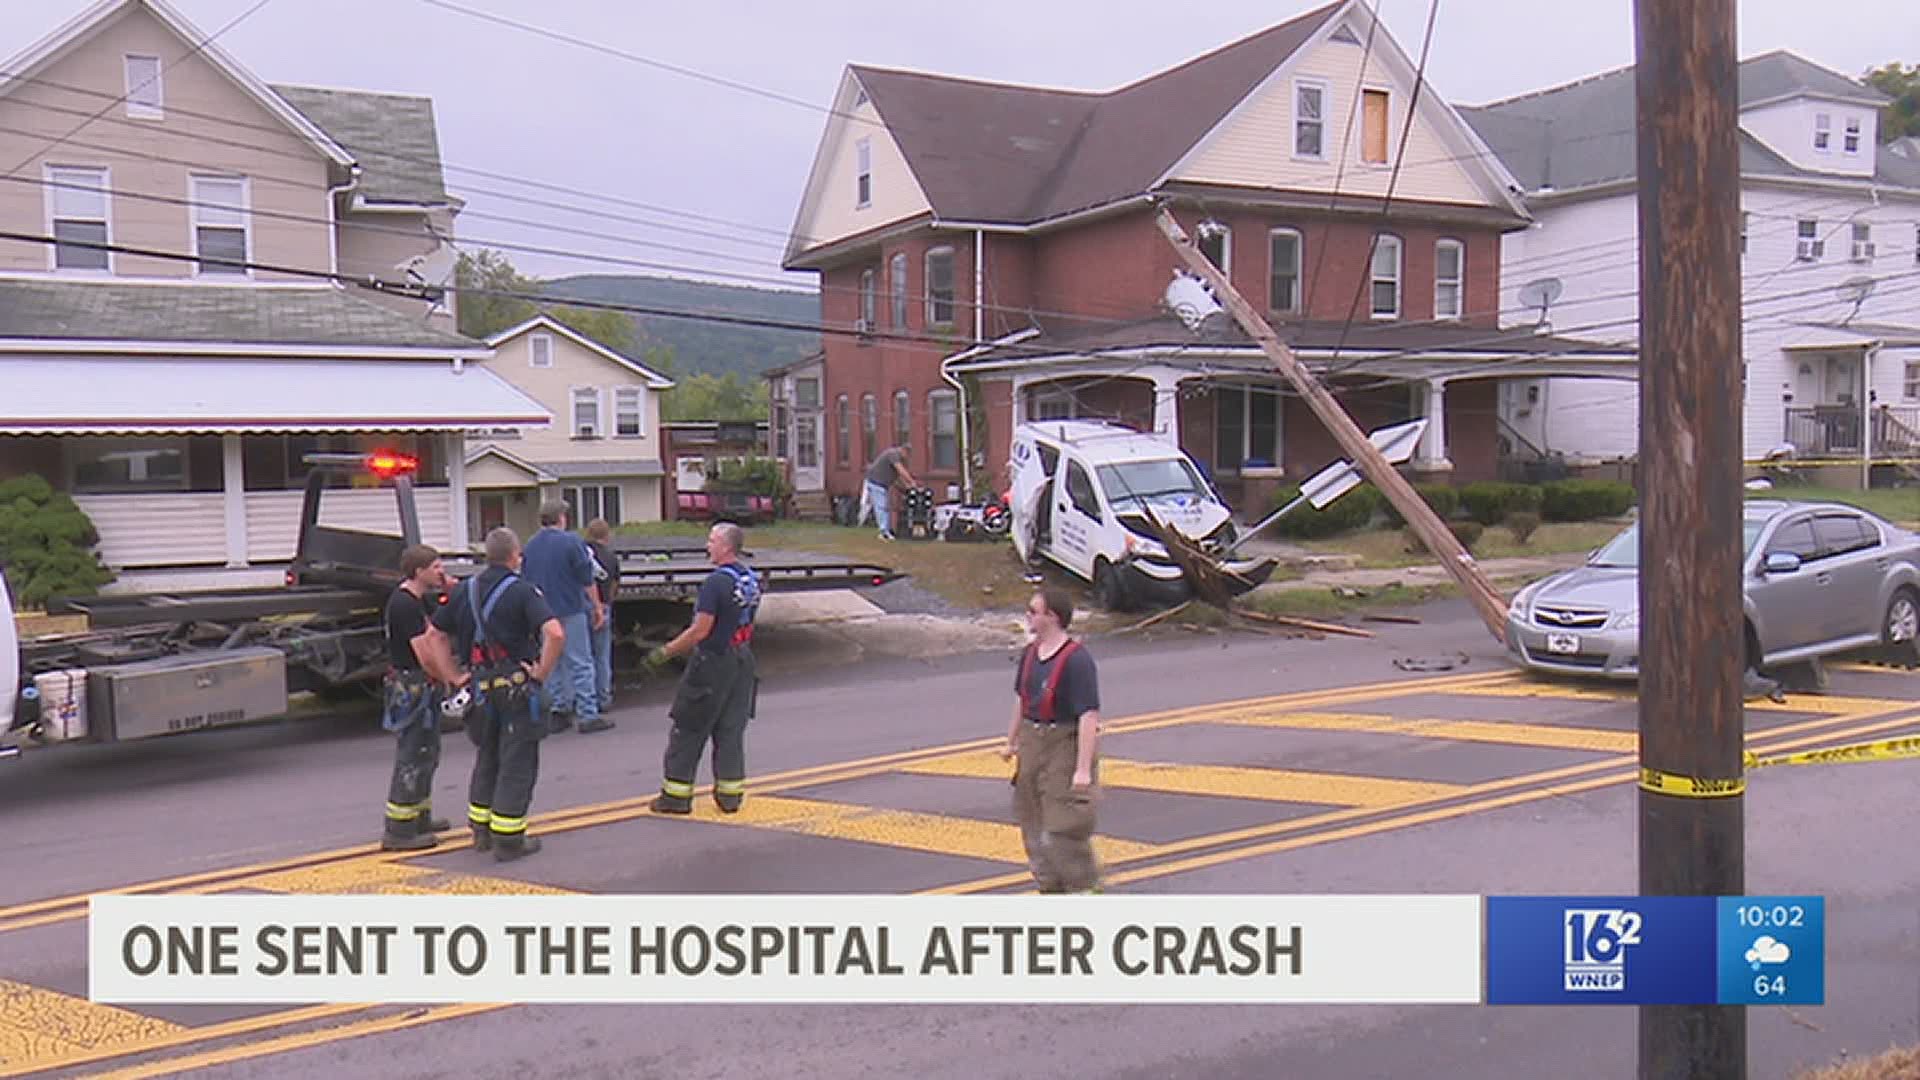 One person was taken to the hospital after a crash Saturday afternoon in Luzerne County.